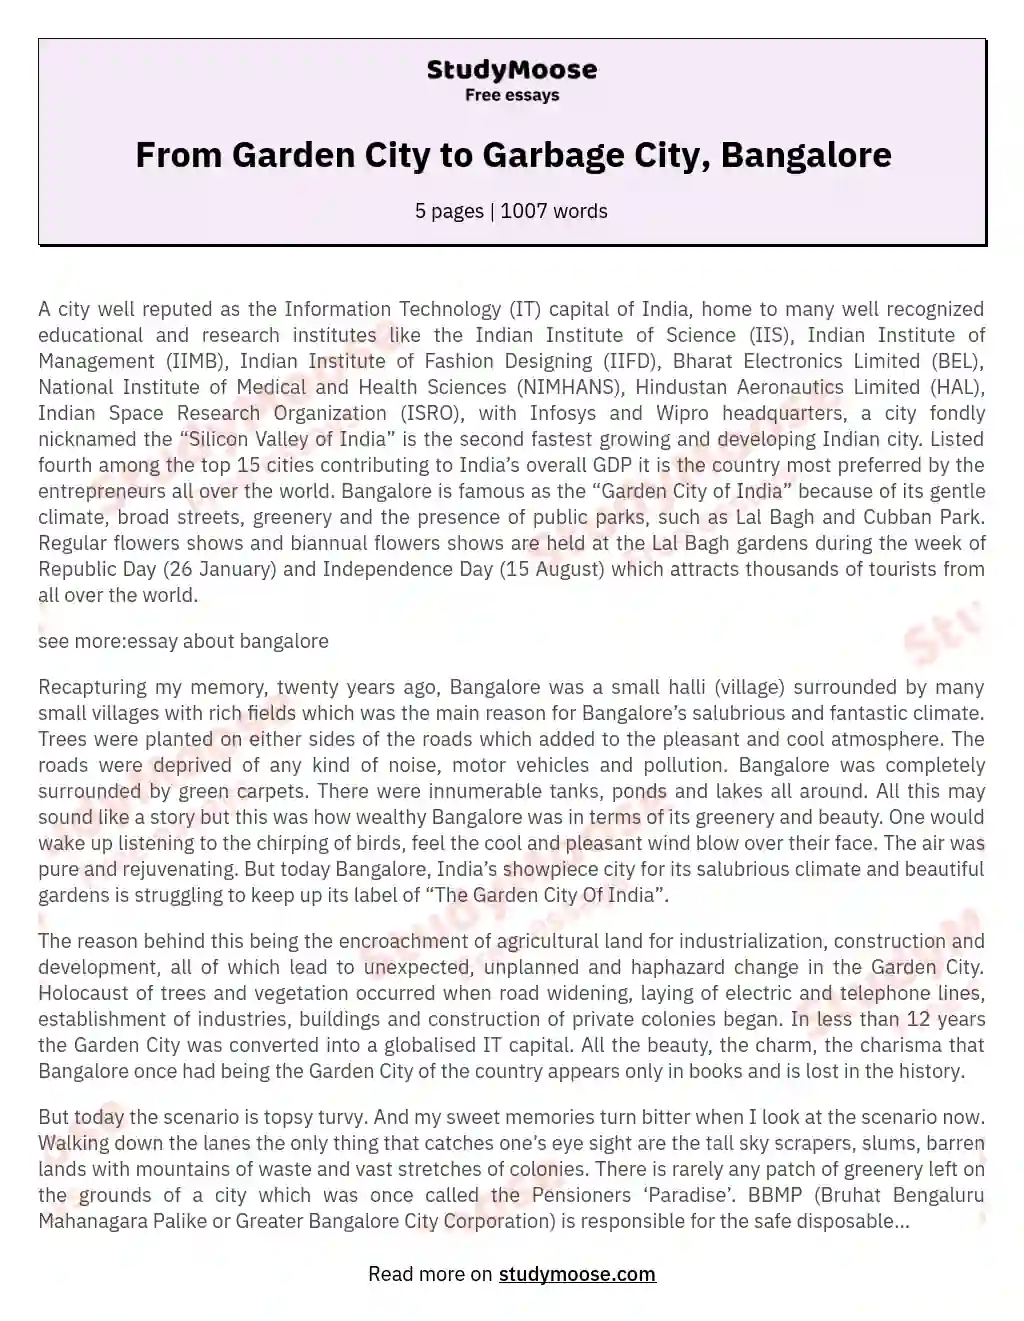 From Garden City to Garbage City, Bangalore essay